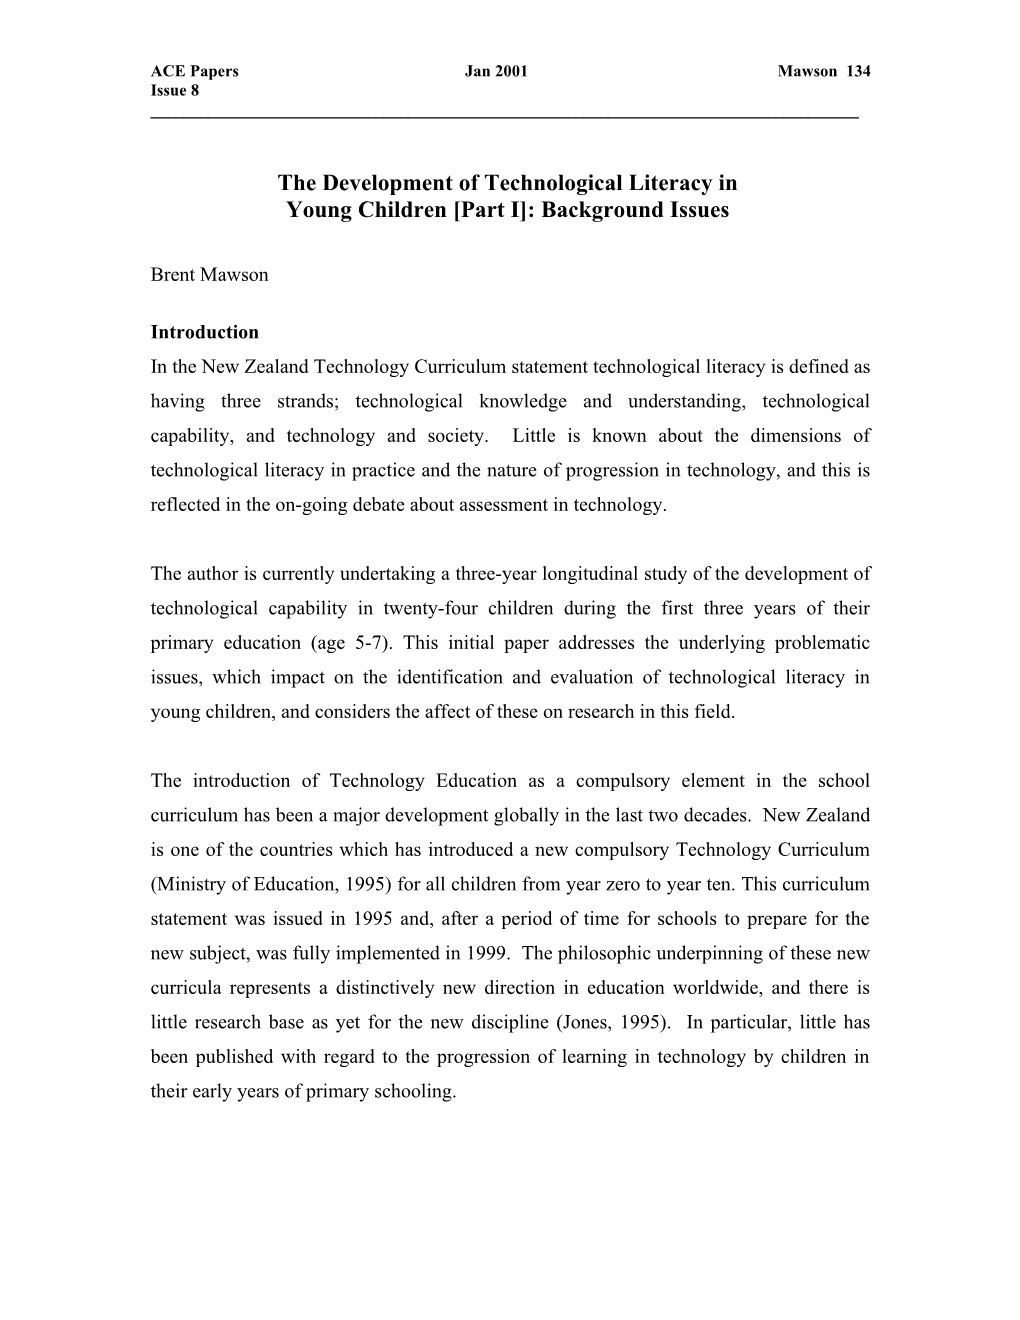 Identifying the Development of Technological Literacy in Young Children